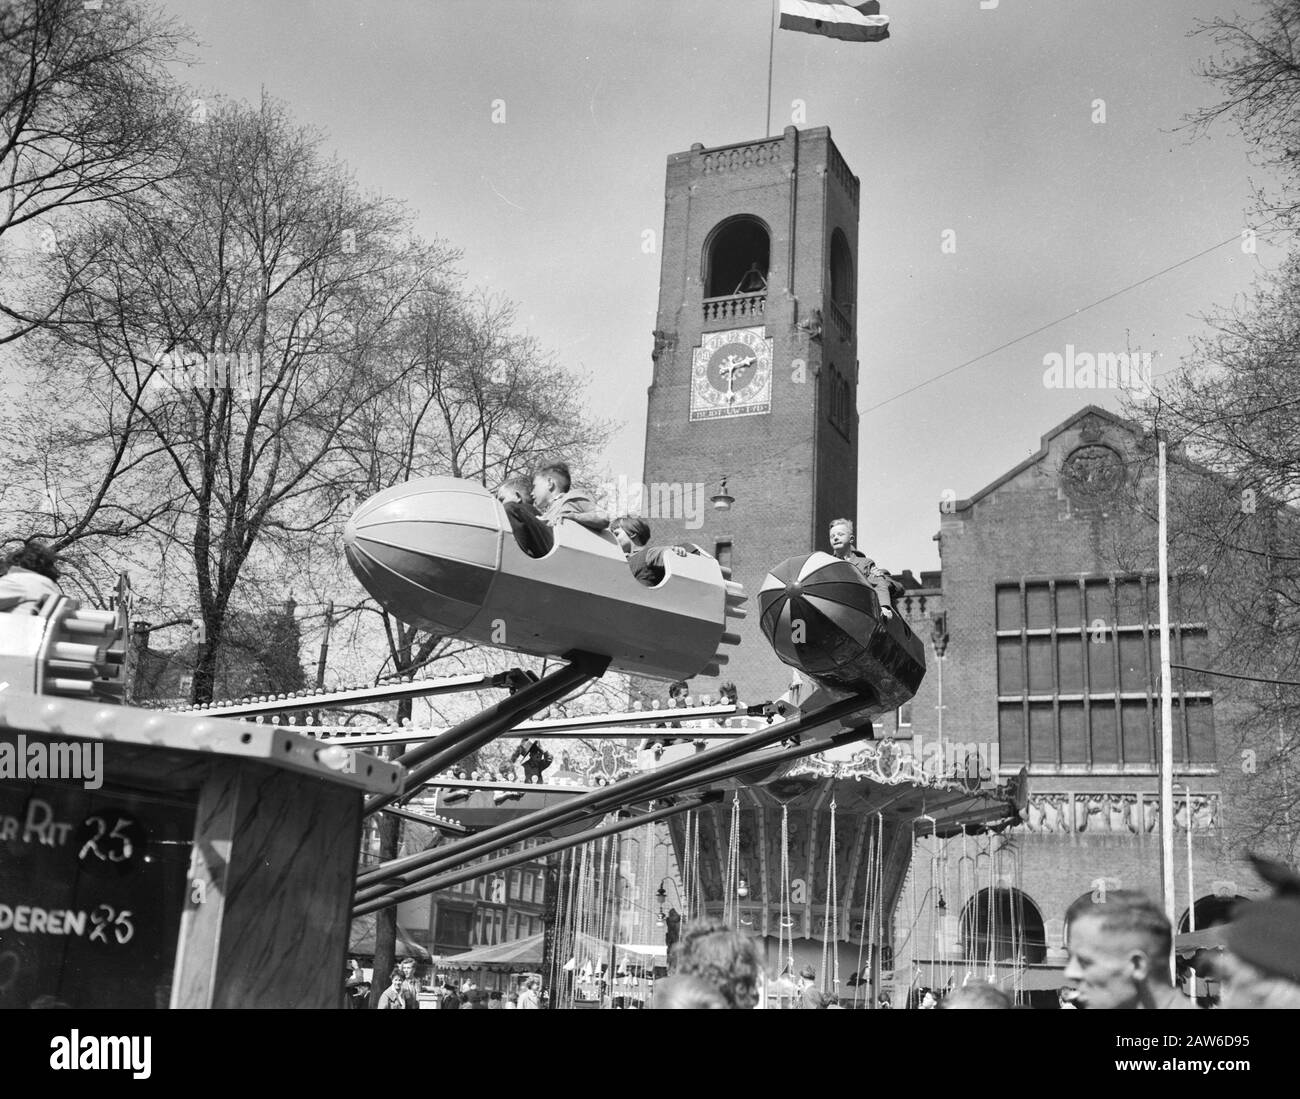 National Day; fair on Beursplein Amsterdam Annotation: The exhibition of architect H. P. Berlage was built between 1898 and 1903 Date: May 5, 1956 Location: Amsterdam, Noord-Holland Keywords: trade fairs, carnivals Stock Photo